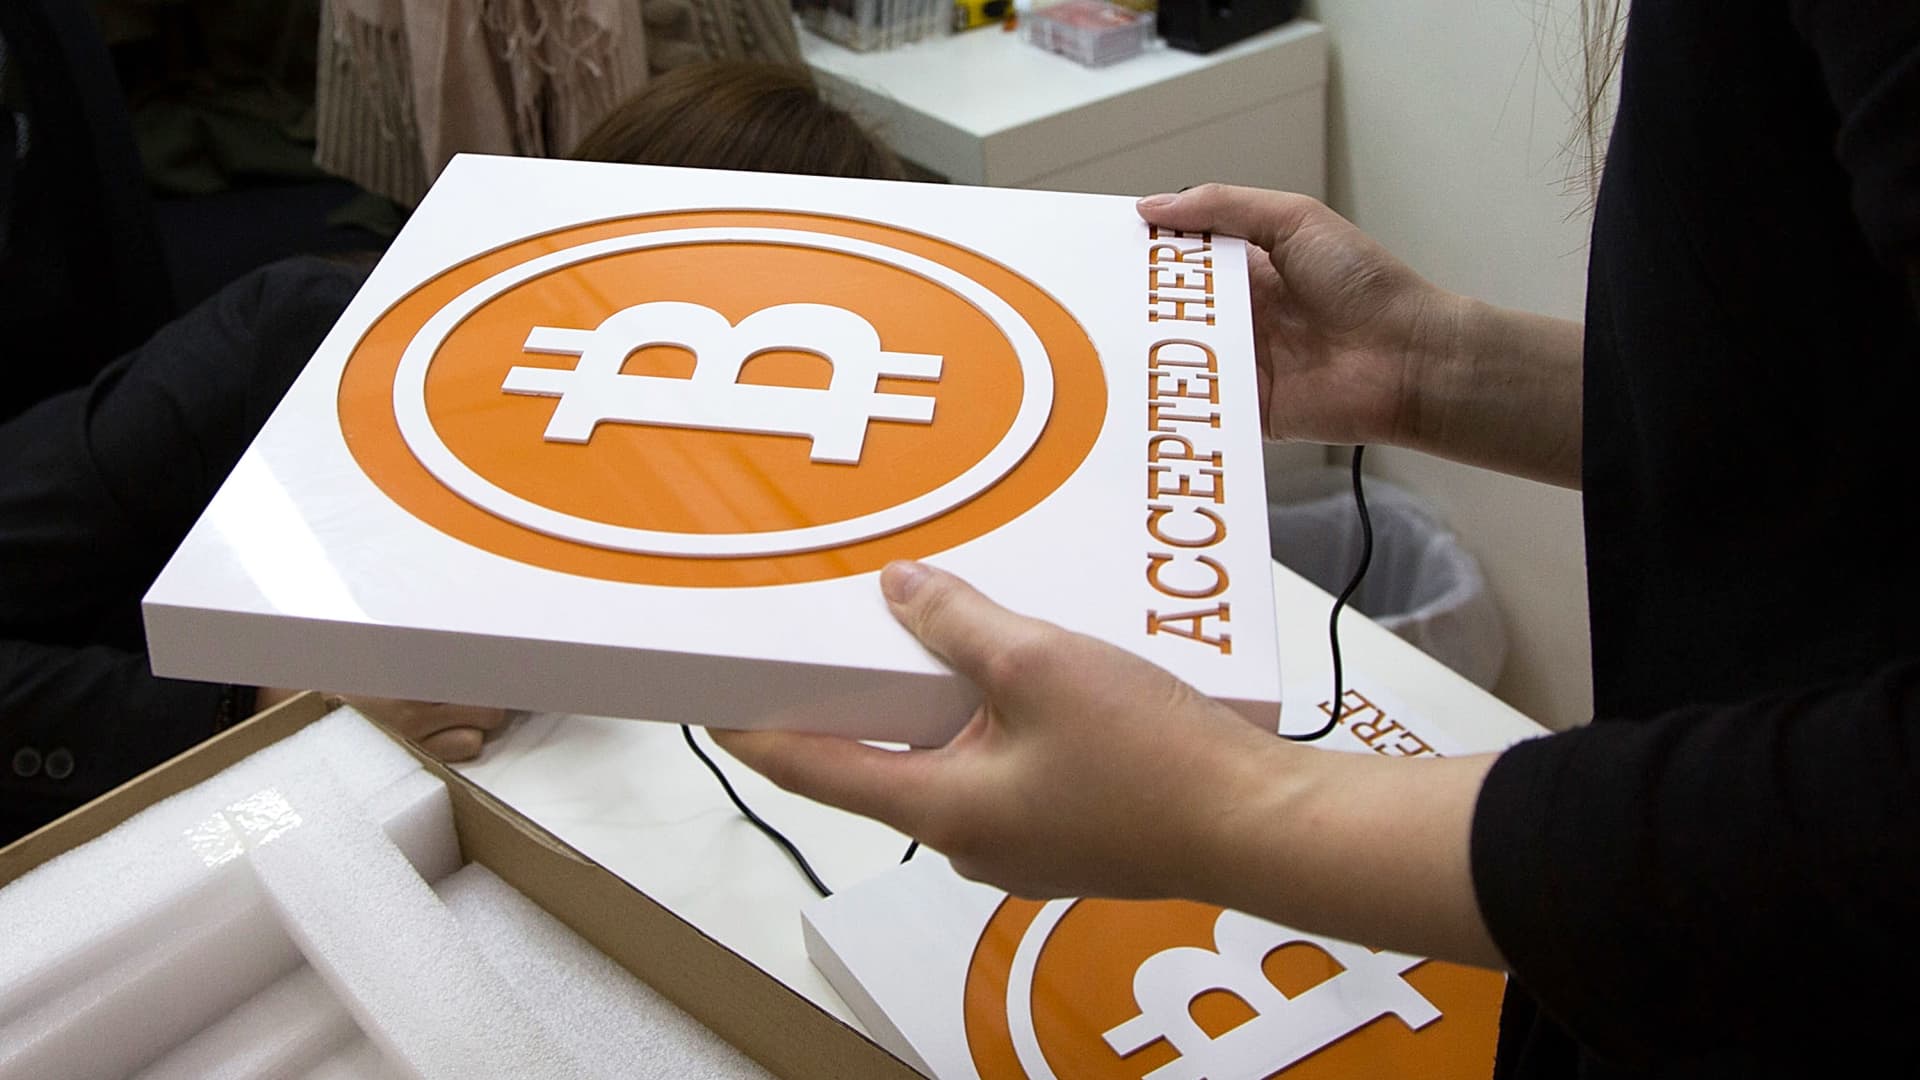 Mt gox says it found 200 000 bitcoins in old wallet brands sed replace lines between two patterns of speciation